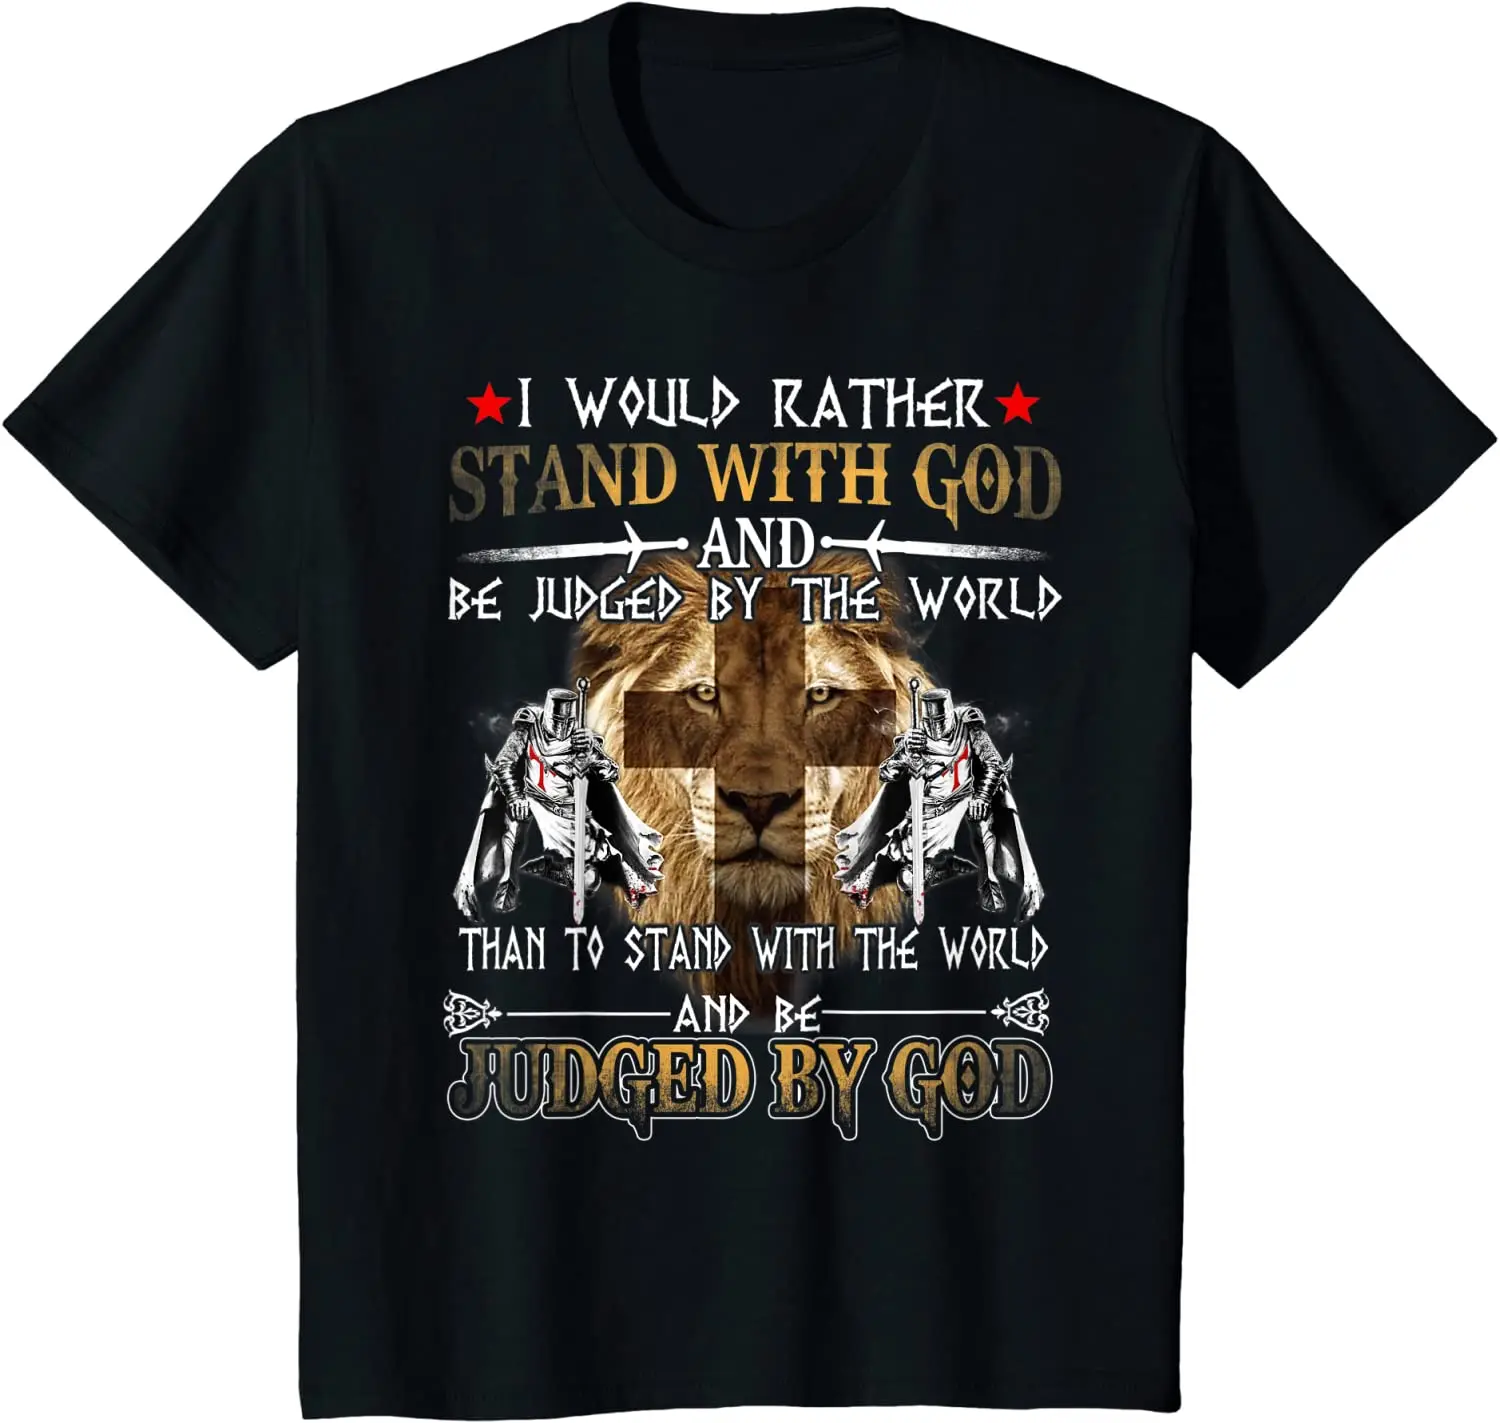 

I Would Rather Stand With God. fashion Knight Templar T-Shirt. Summer Cotton Short Sleeve O-Neck Mens T Shirt New S-3XL